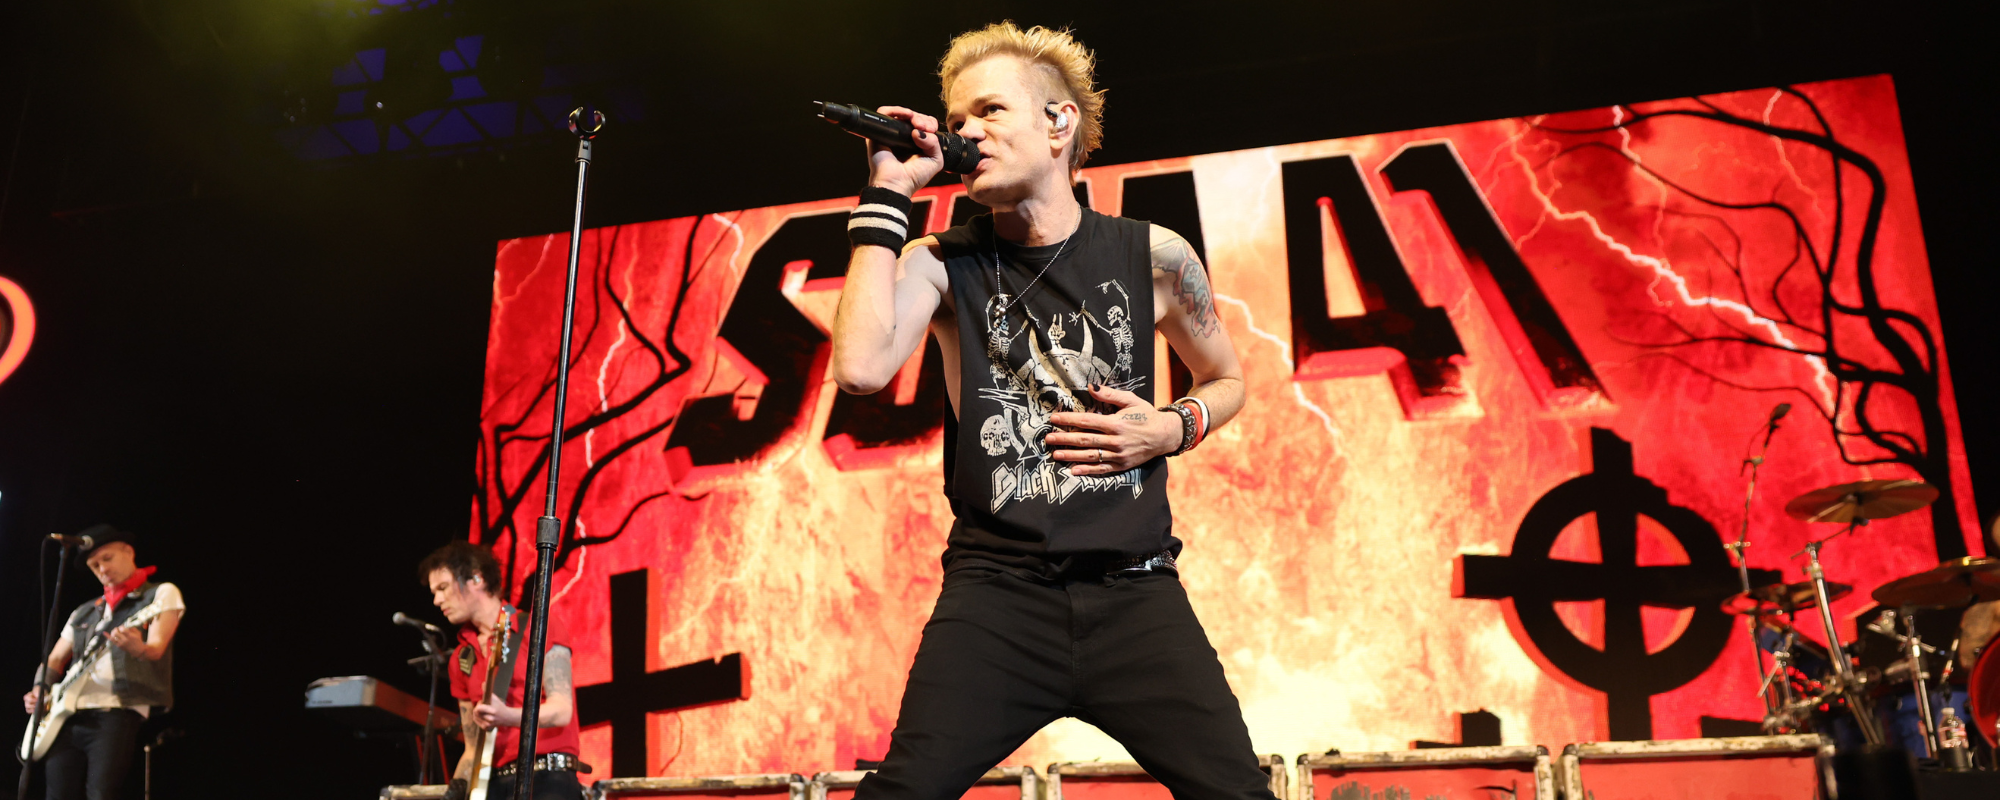 Sum 41 Announces Final Headlining World Tour ‘Tour Of The Setting Sum’: How To Buy Tickets